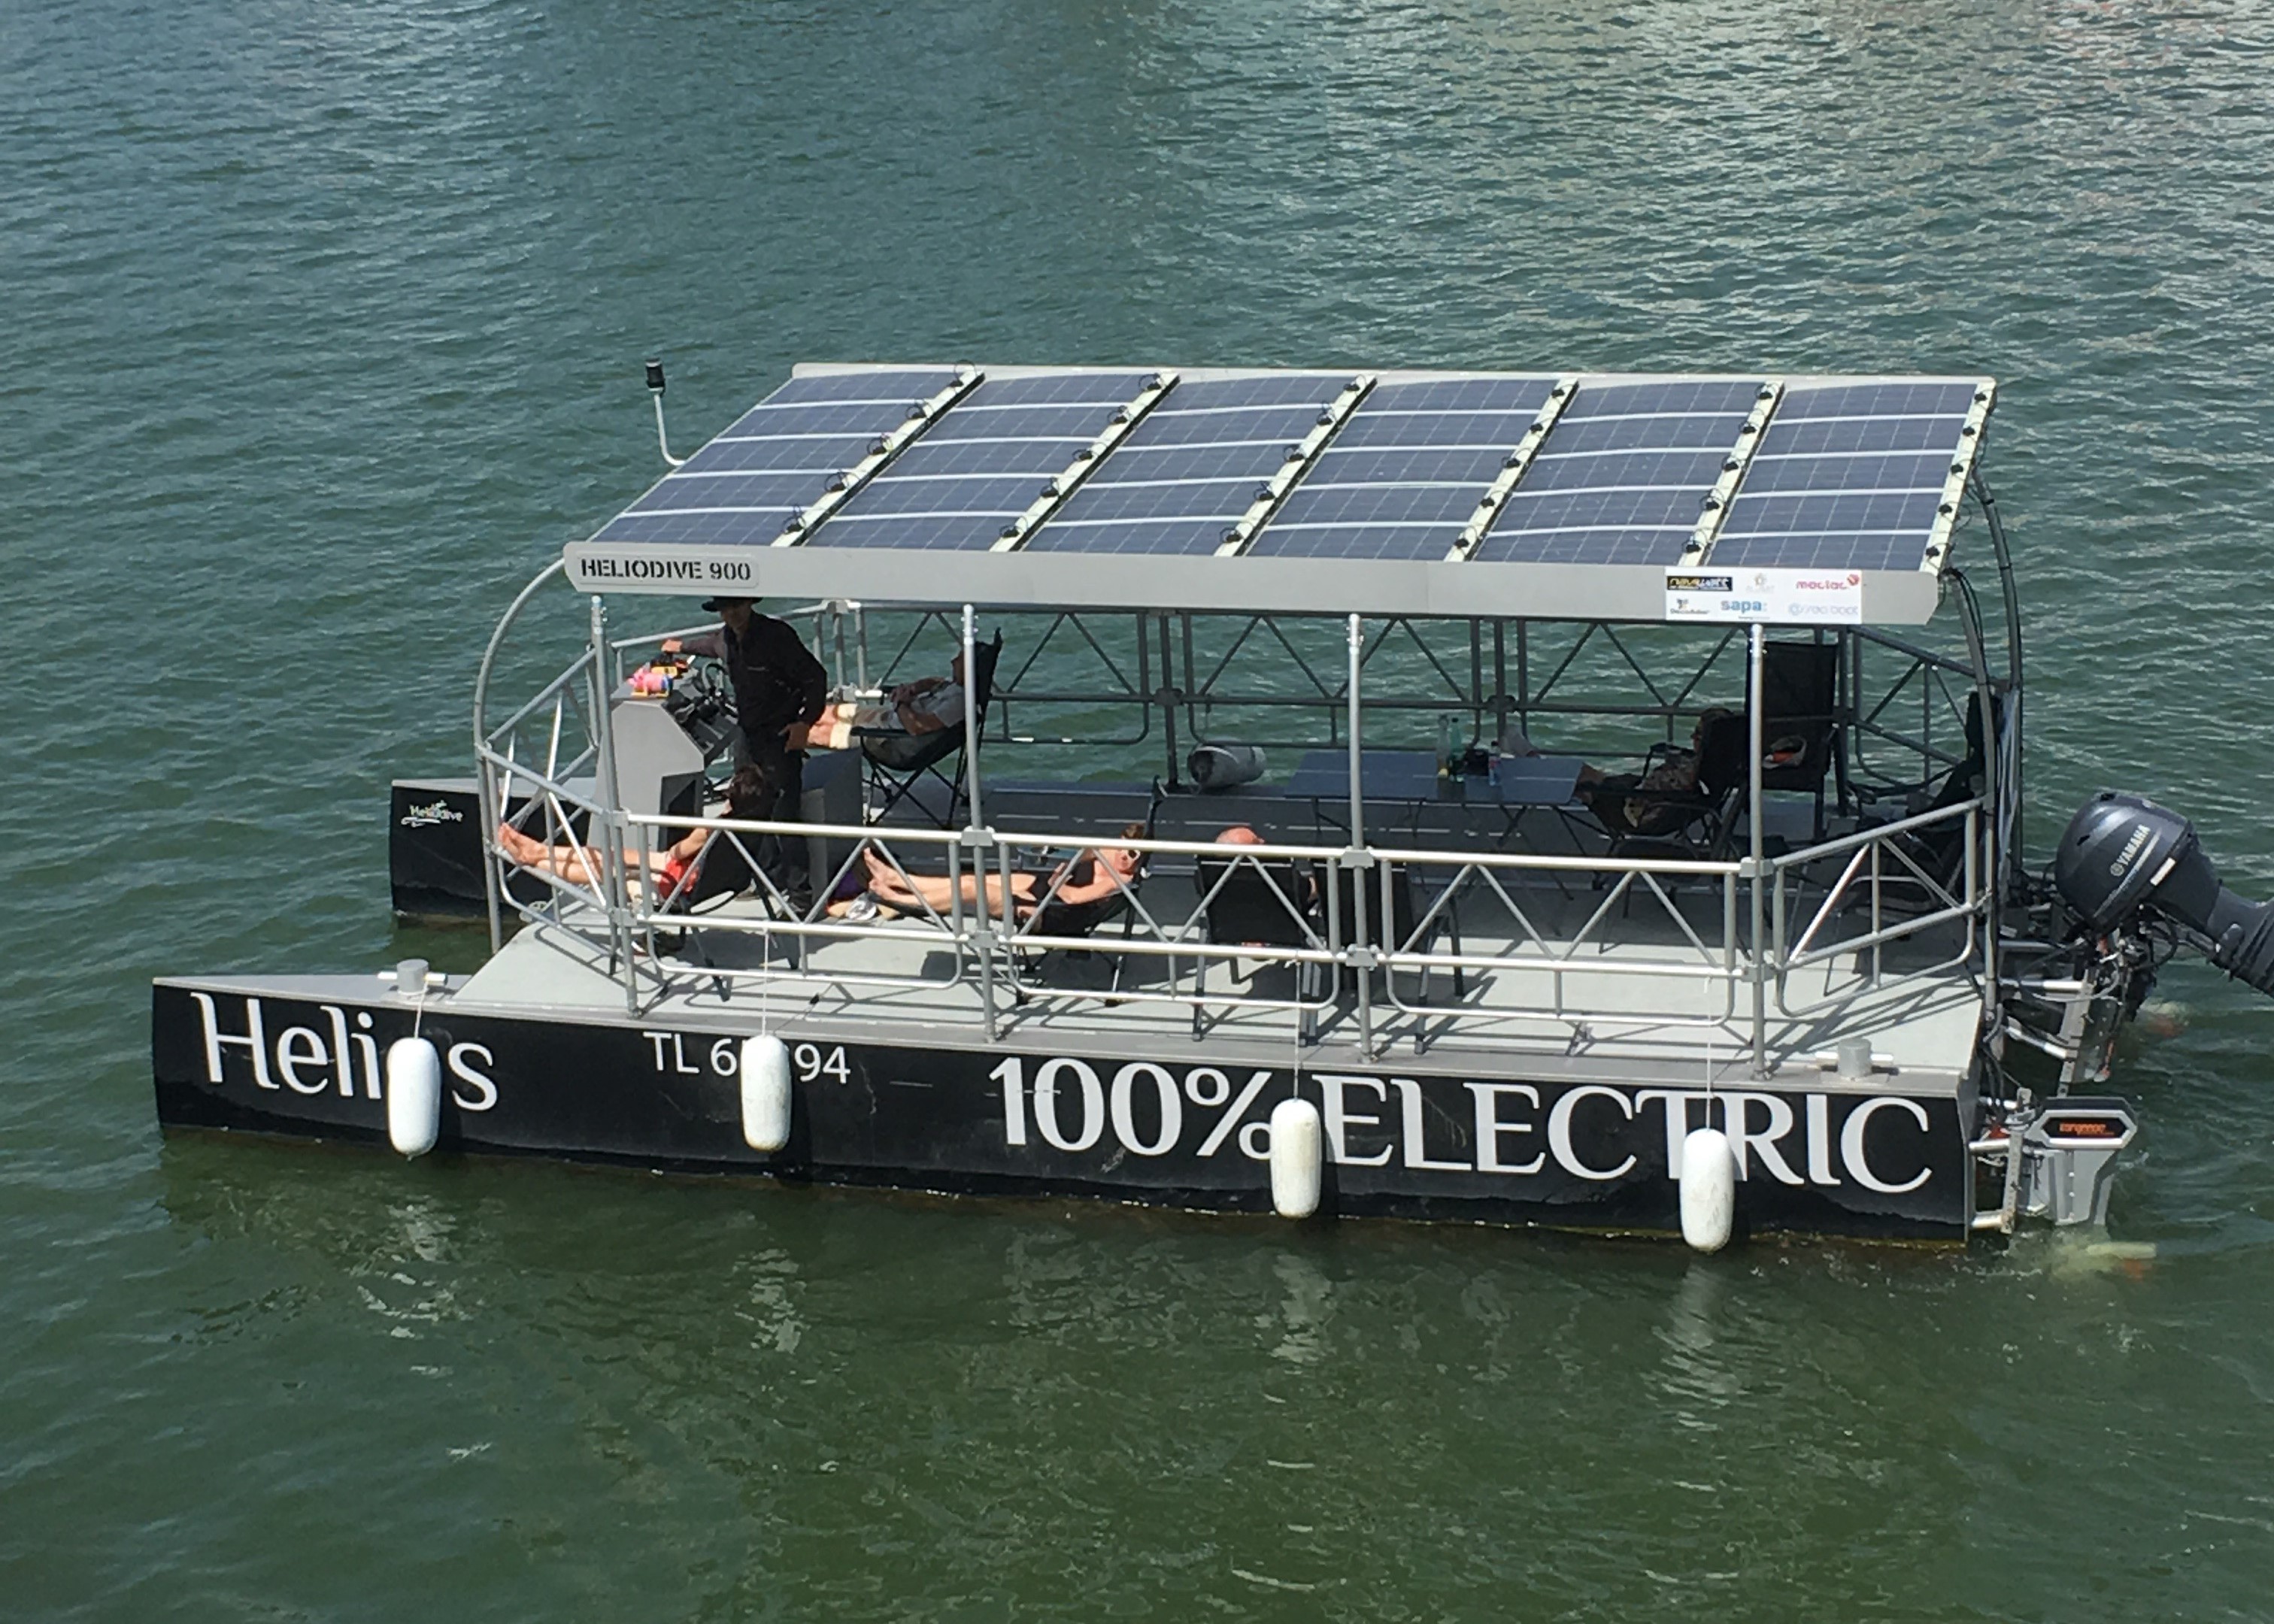 Heliodive Full Electric Passenger Ferry 1